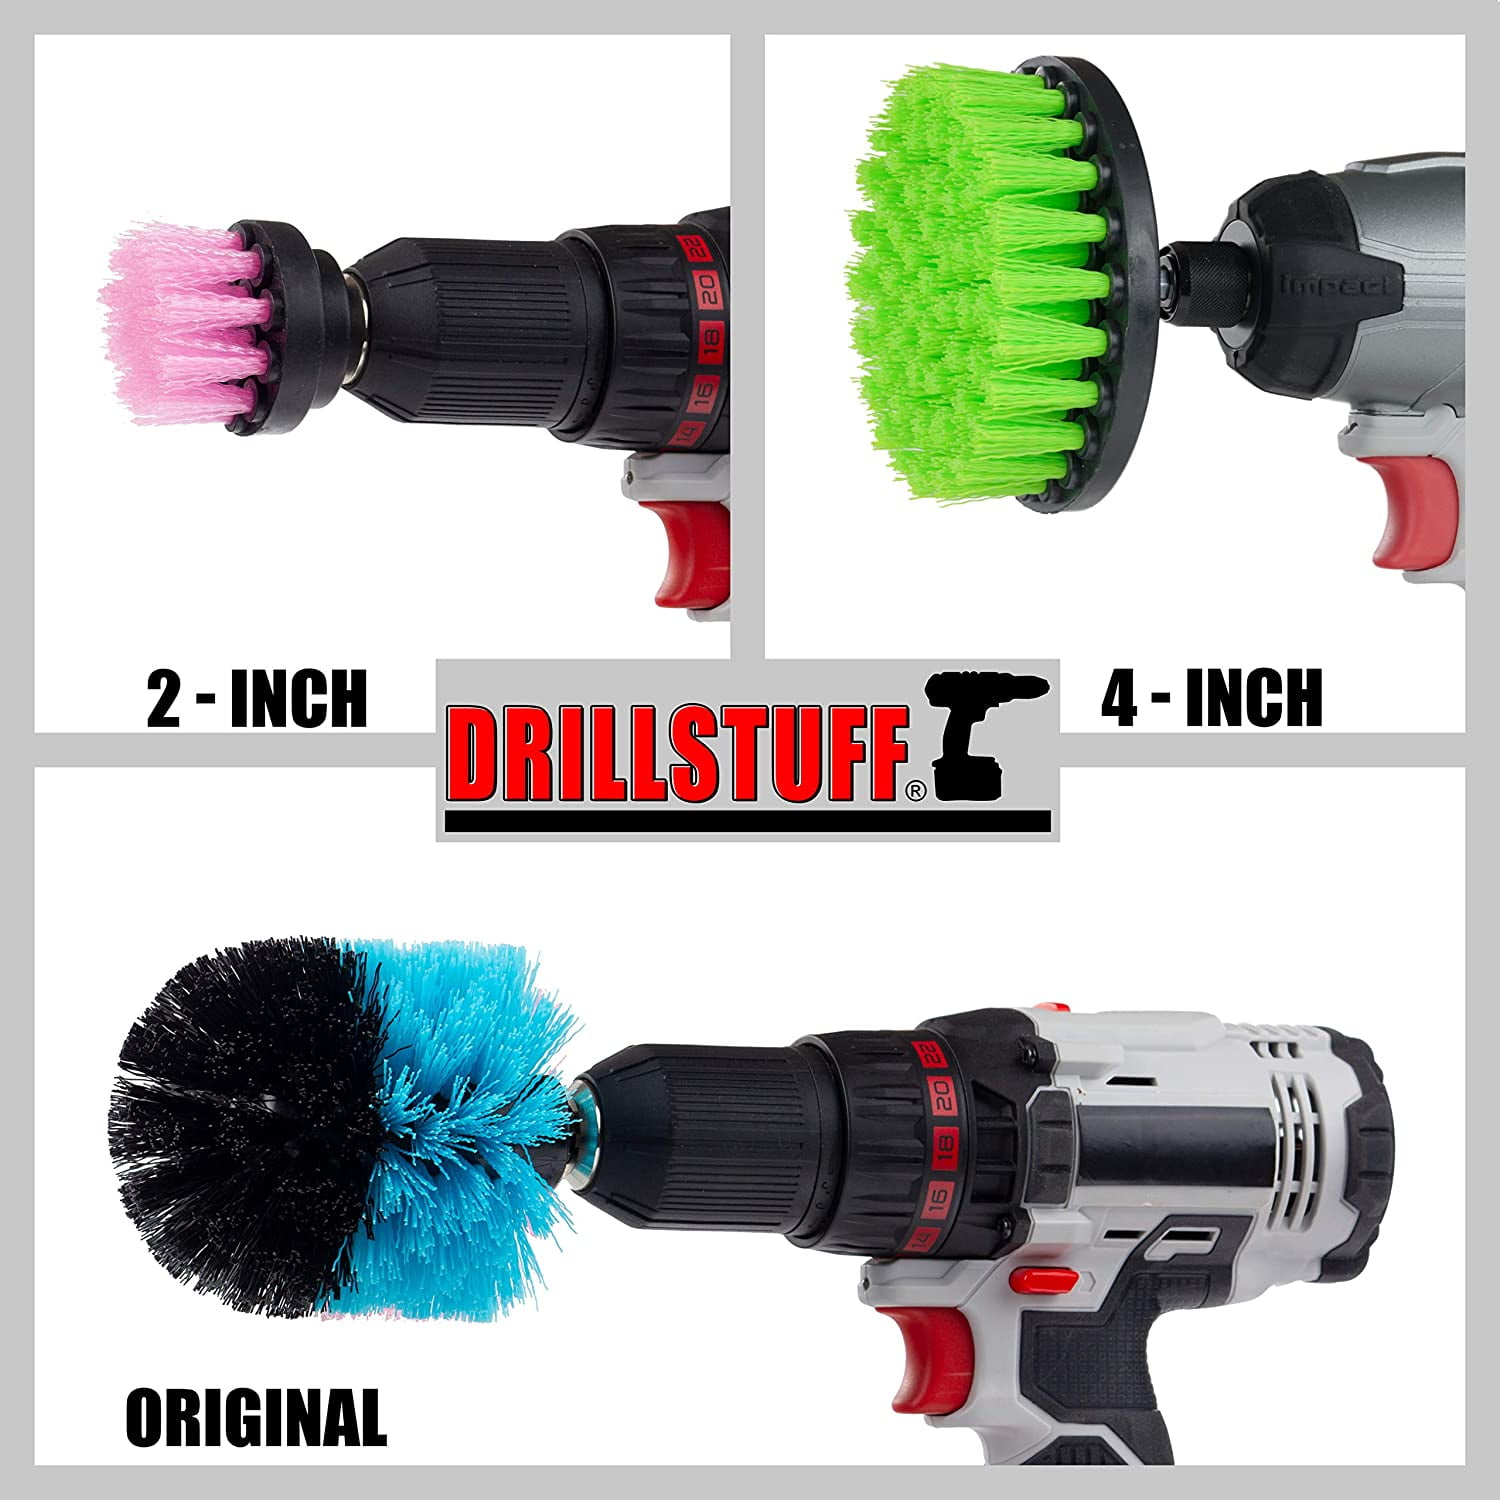 Drill Brush - Cleaning Supplies - Rotary Brush Kit w/Extension - Kitchen Accessories – Pots and Pans - Cast Iron Skillet - Power Dish Washing